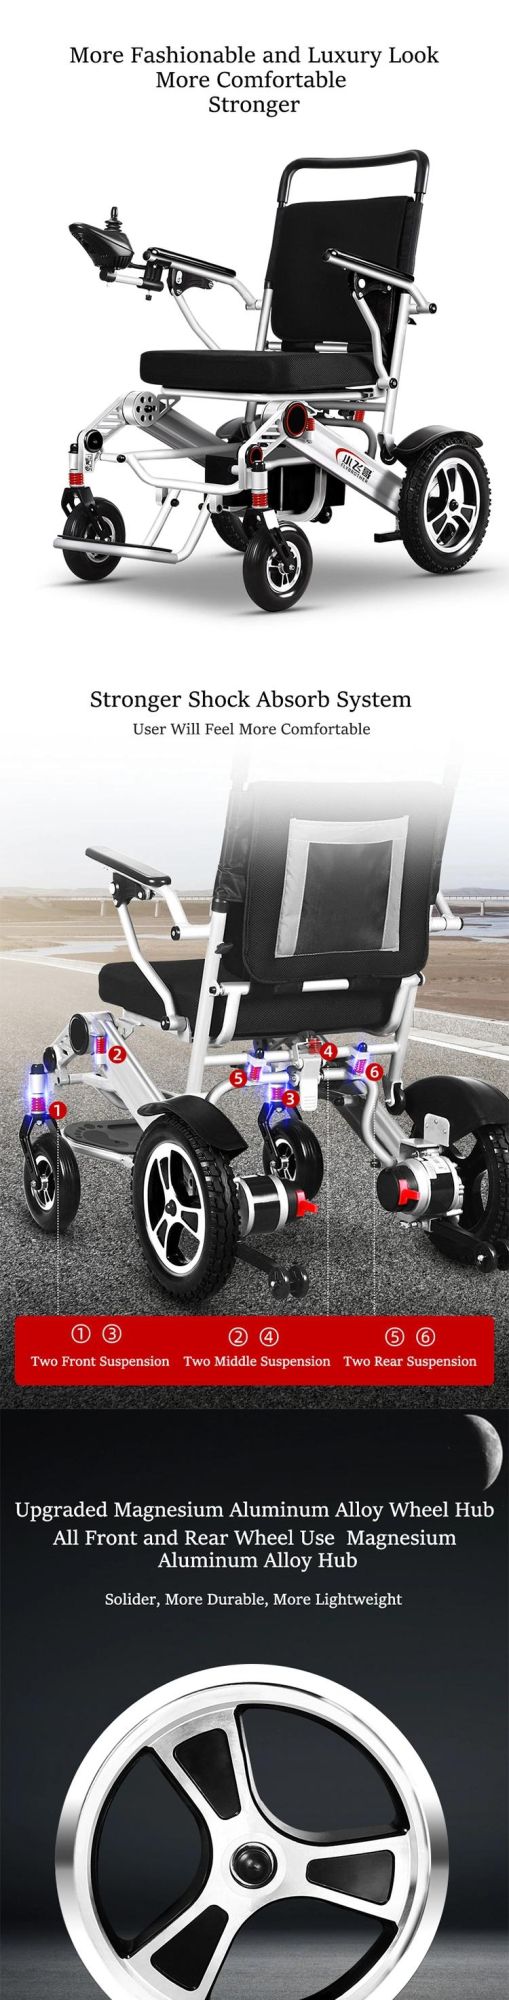 China High Quality Handicapped Hospital Folding Lightweight Wheelchair